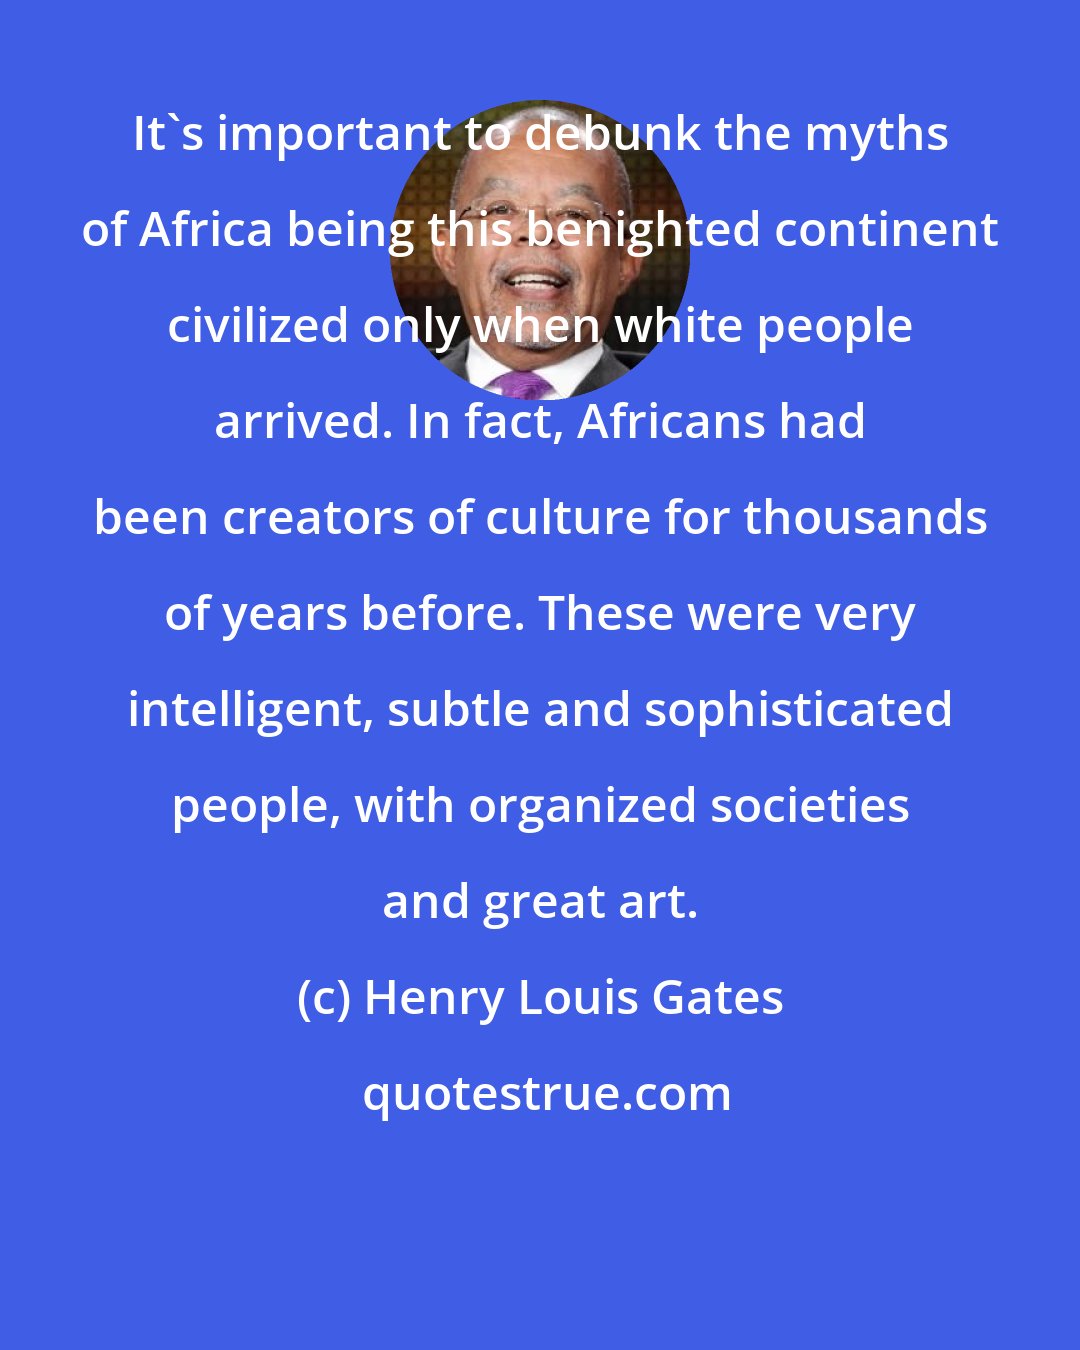 Henry Louis Gates: It's important to debunk the myths of Africa being this benighted continent civilized only when white people arrived. In fact, Africans had been creators of culture for thousands of years before. These were very intelligent, subtle and sophisticated people, with organized societies and great art.